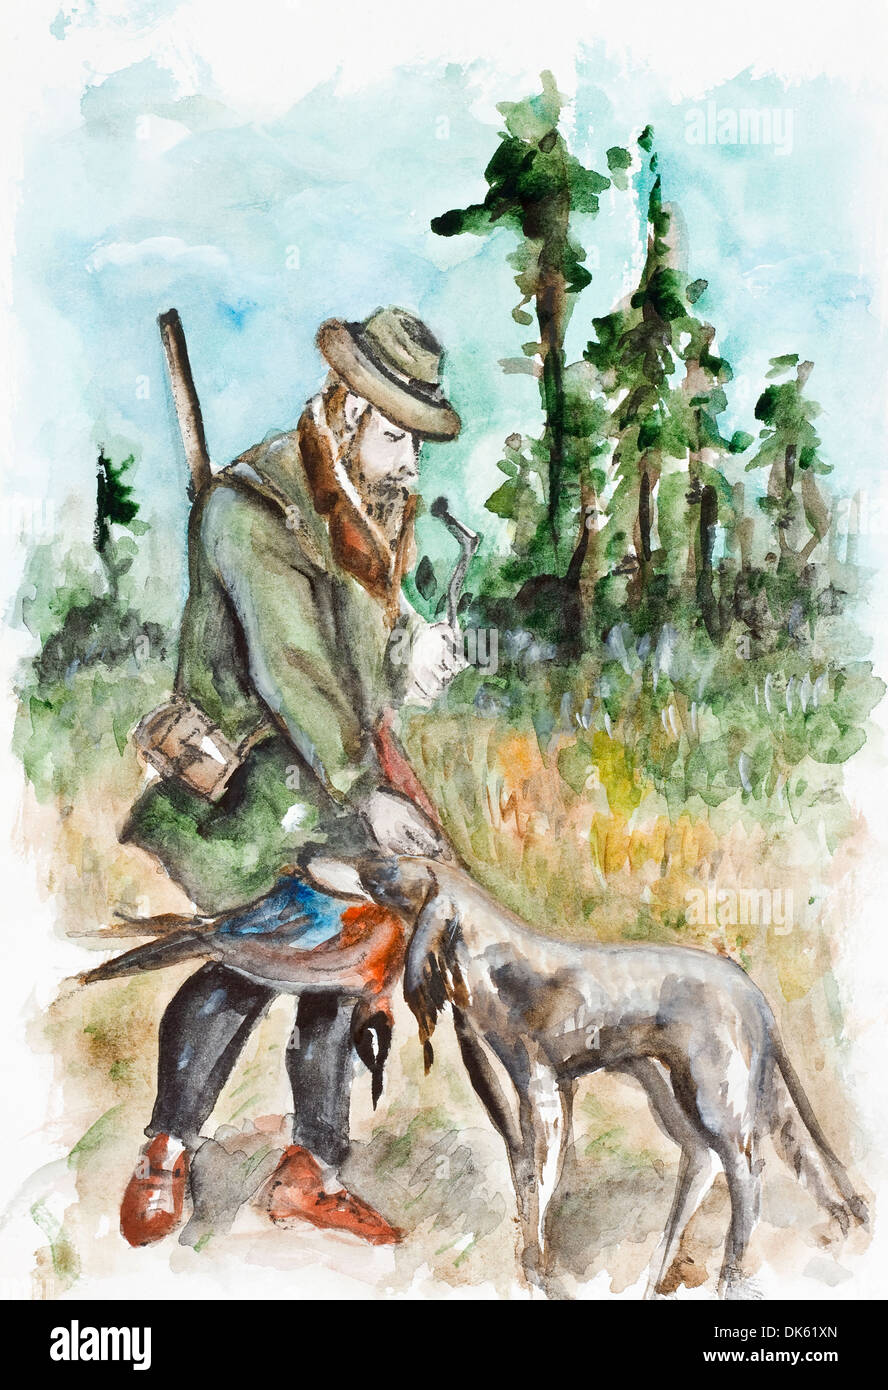 Successful hunting. Hunter thanked the dog for the bird. Watercolor handmade painting art illustration Stock Photo